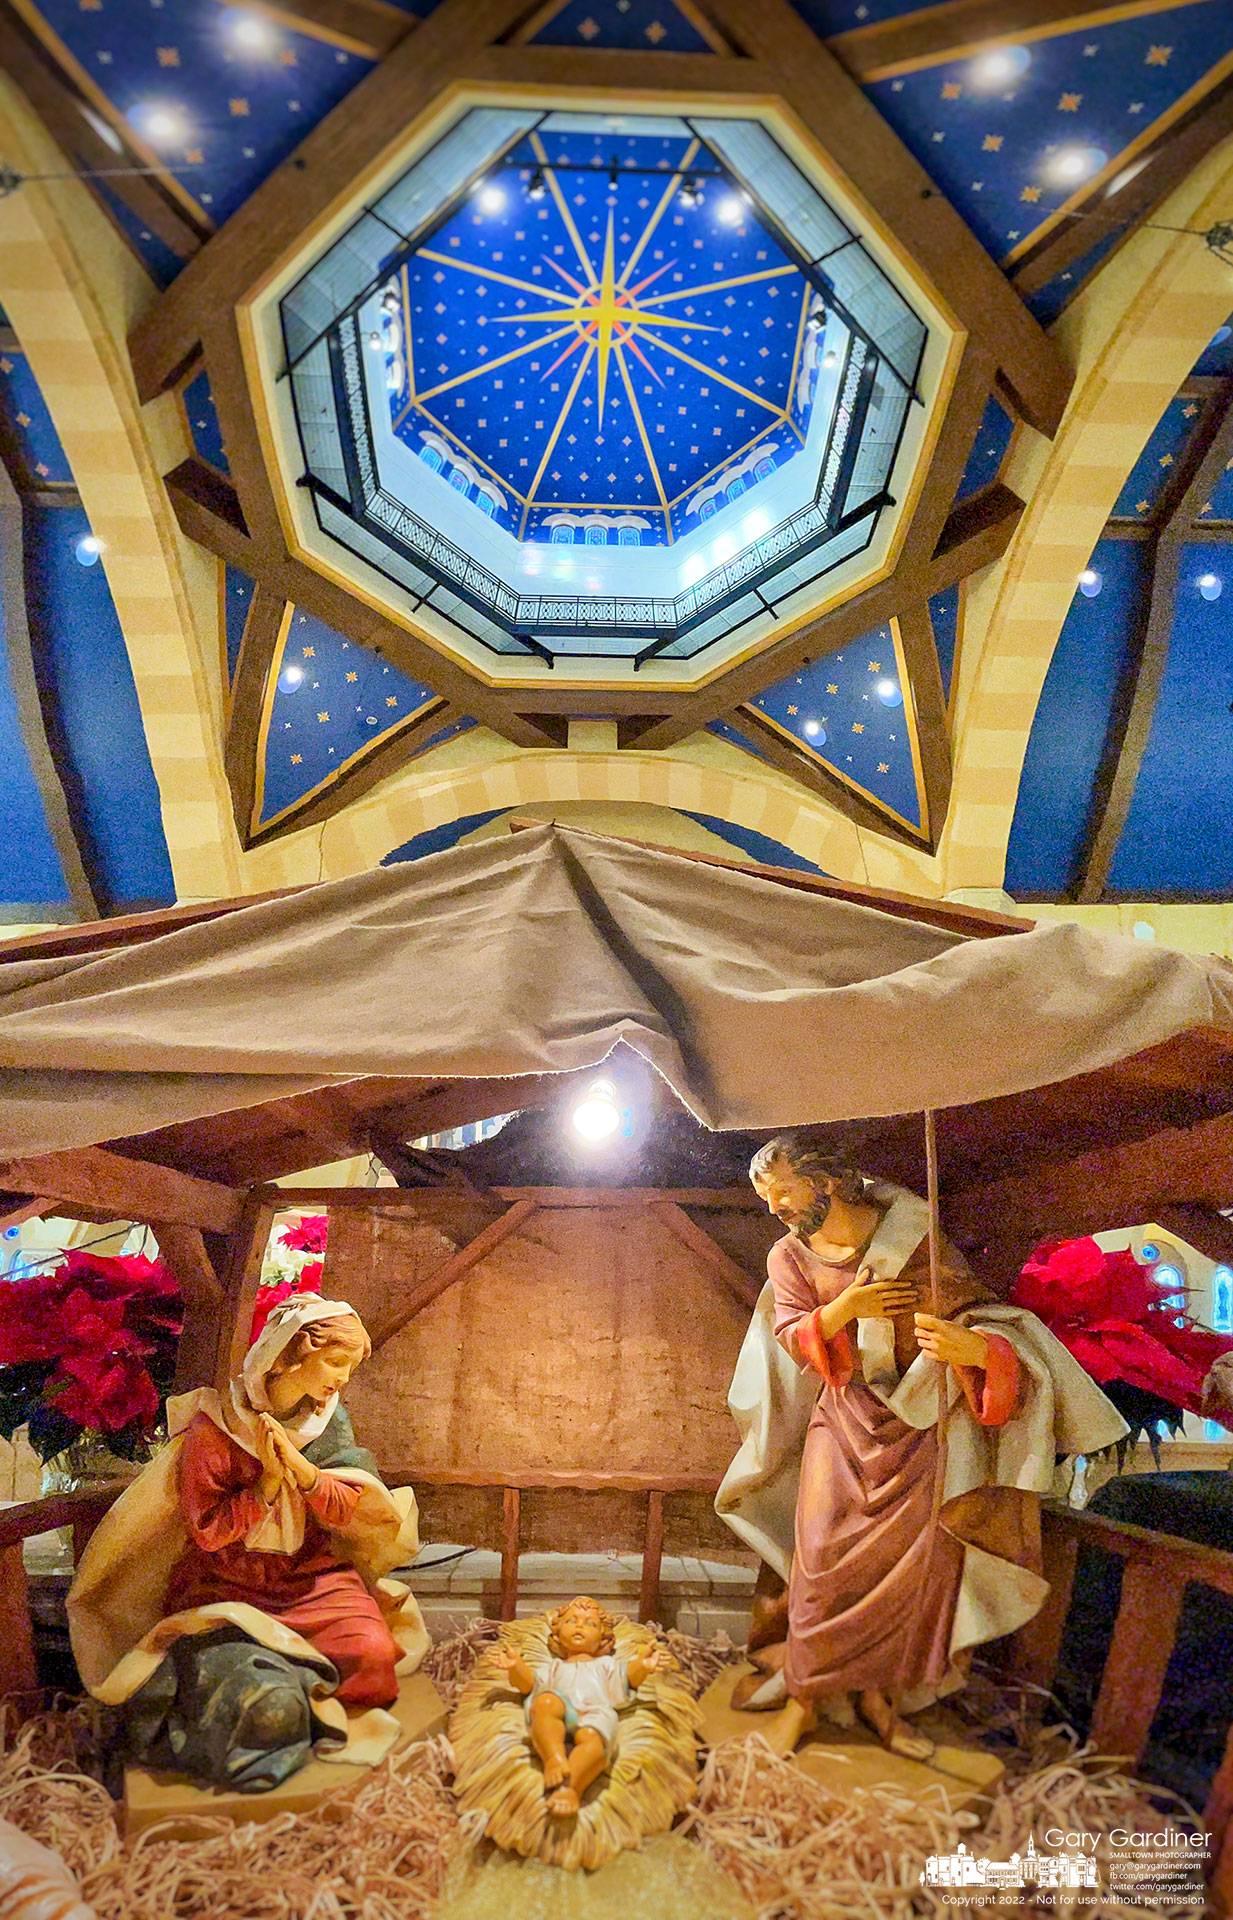 The Nativity scene sits at the front of the altar and beneath the domed ceiling at St. Paul the Apostle Catholic Church bearing a star symbol marking the birth of Christ. My Final Photo for December 25, 2022.